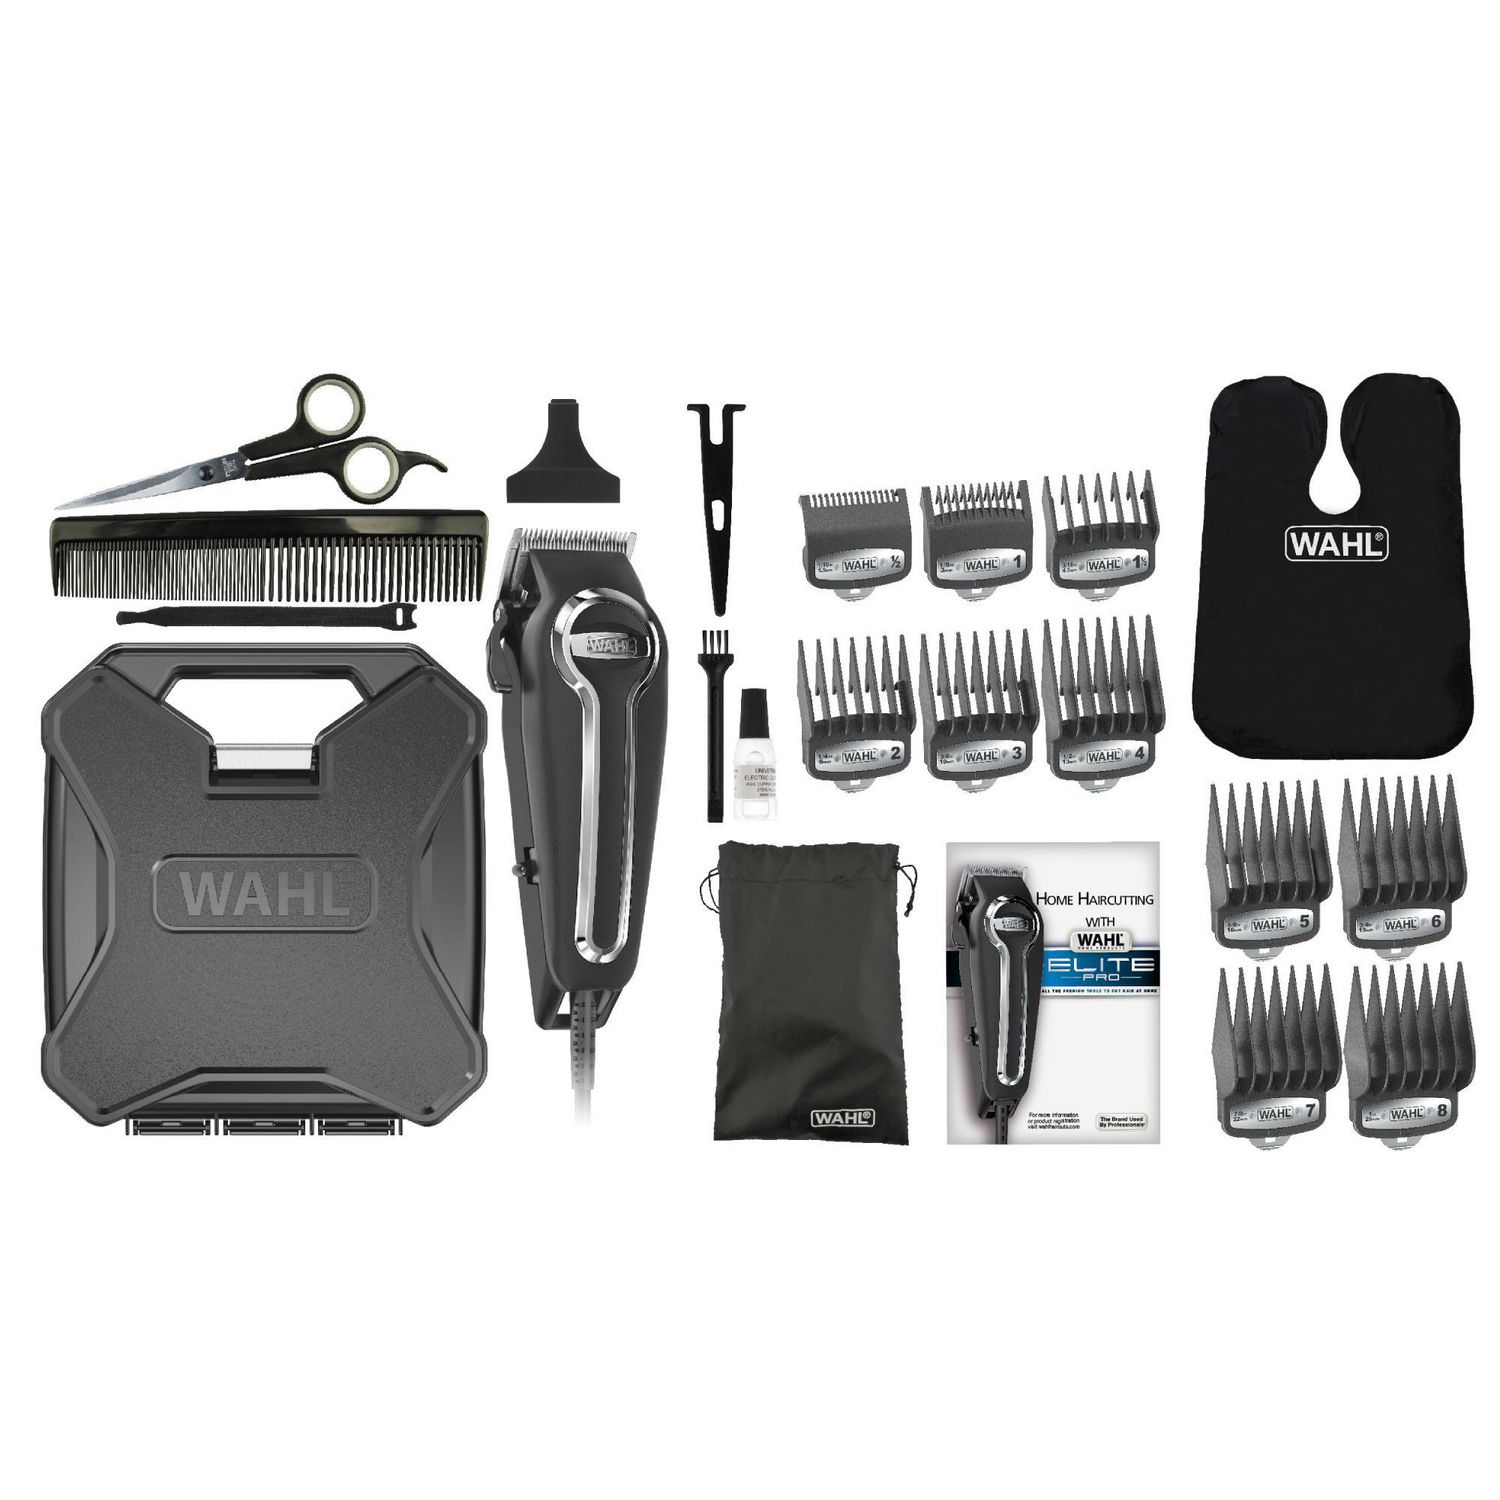 wahl elite pro high performance haircutting kit 79602